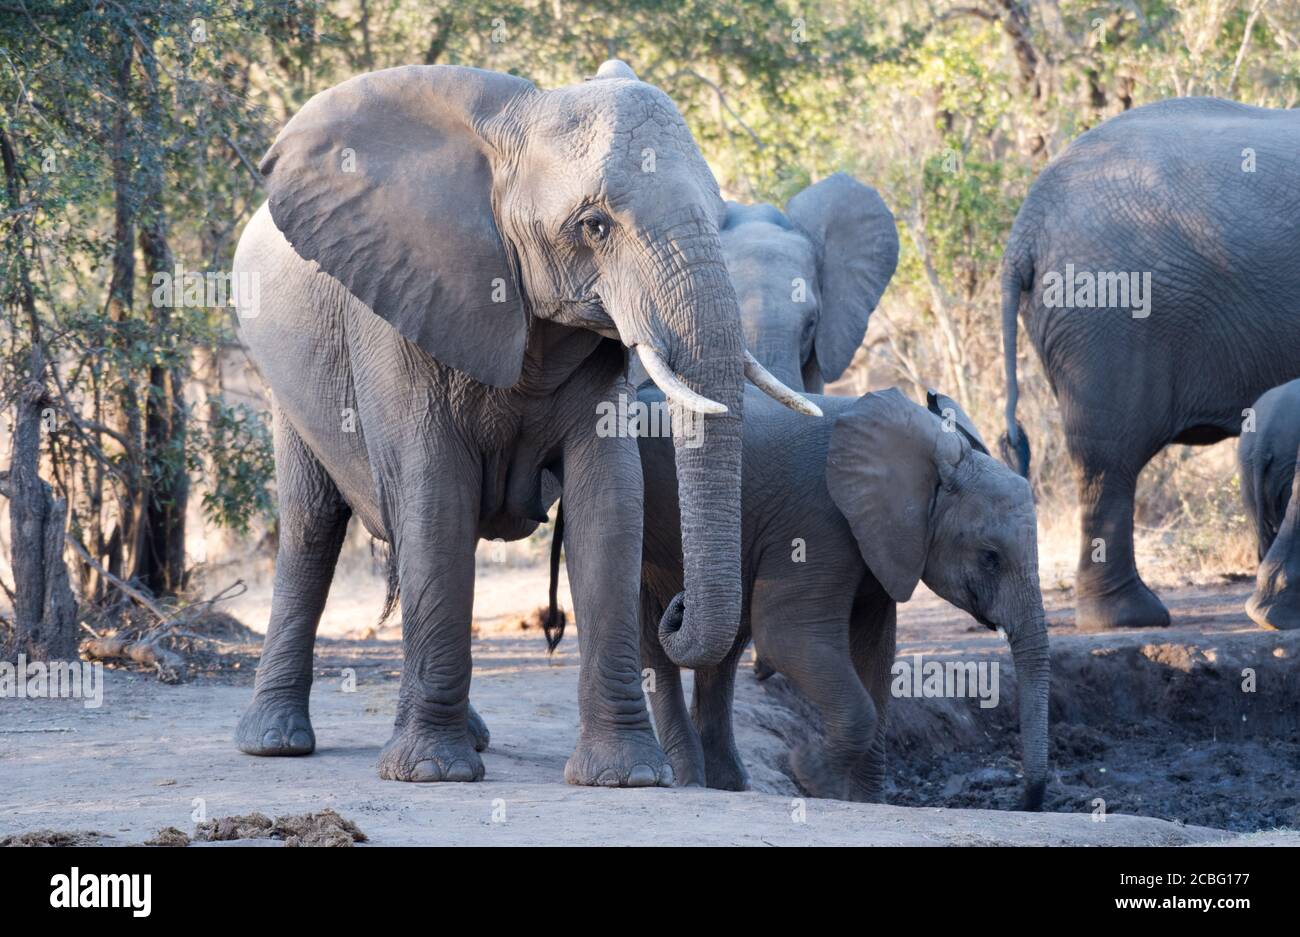 Elephant group at waterhole making turns to stand and drink water Stock Photo